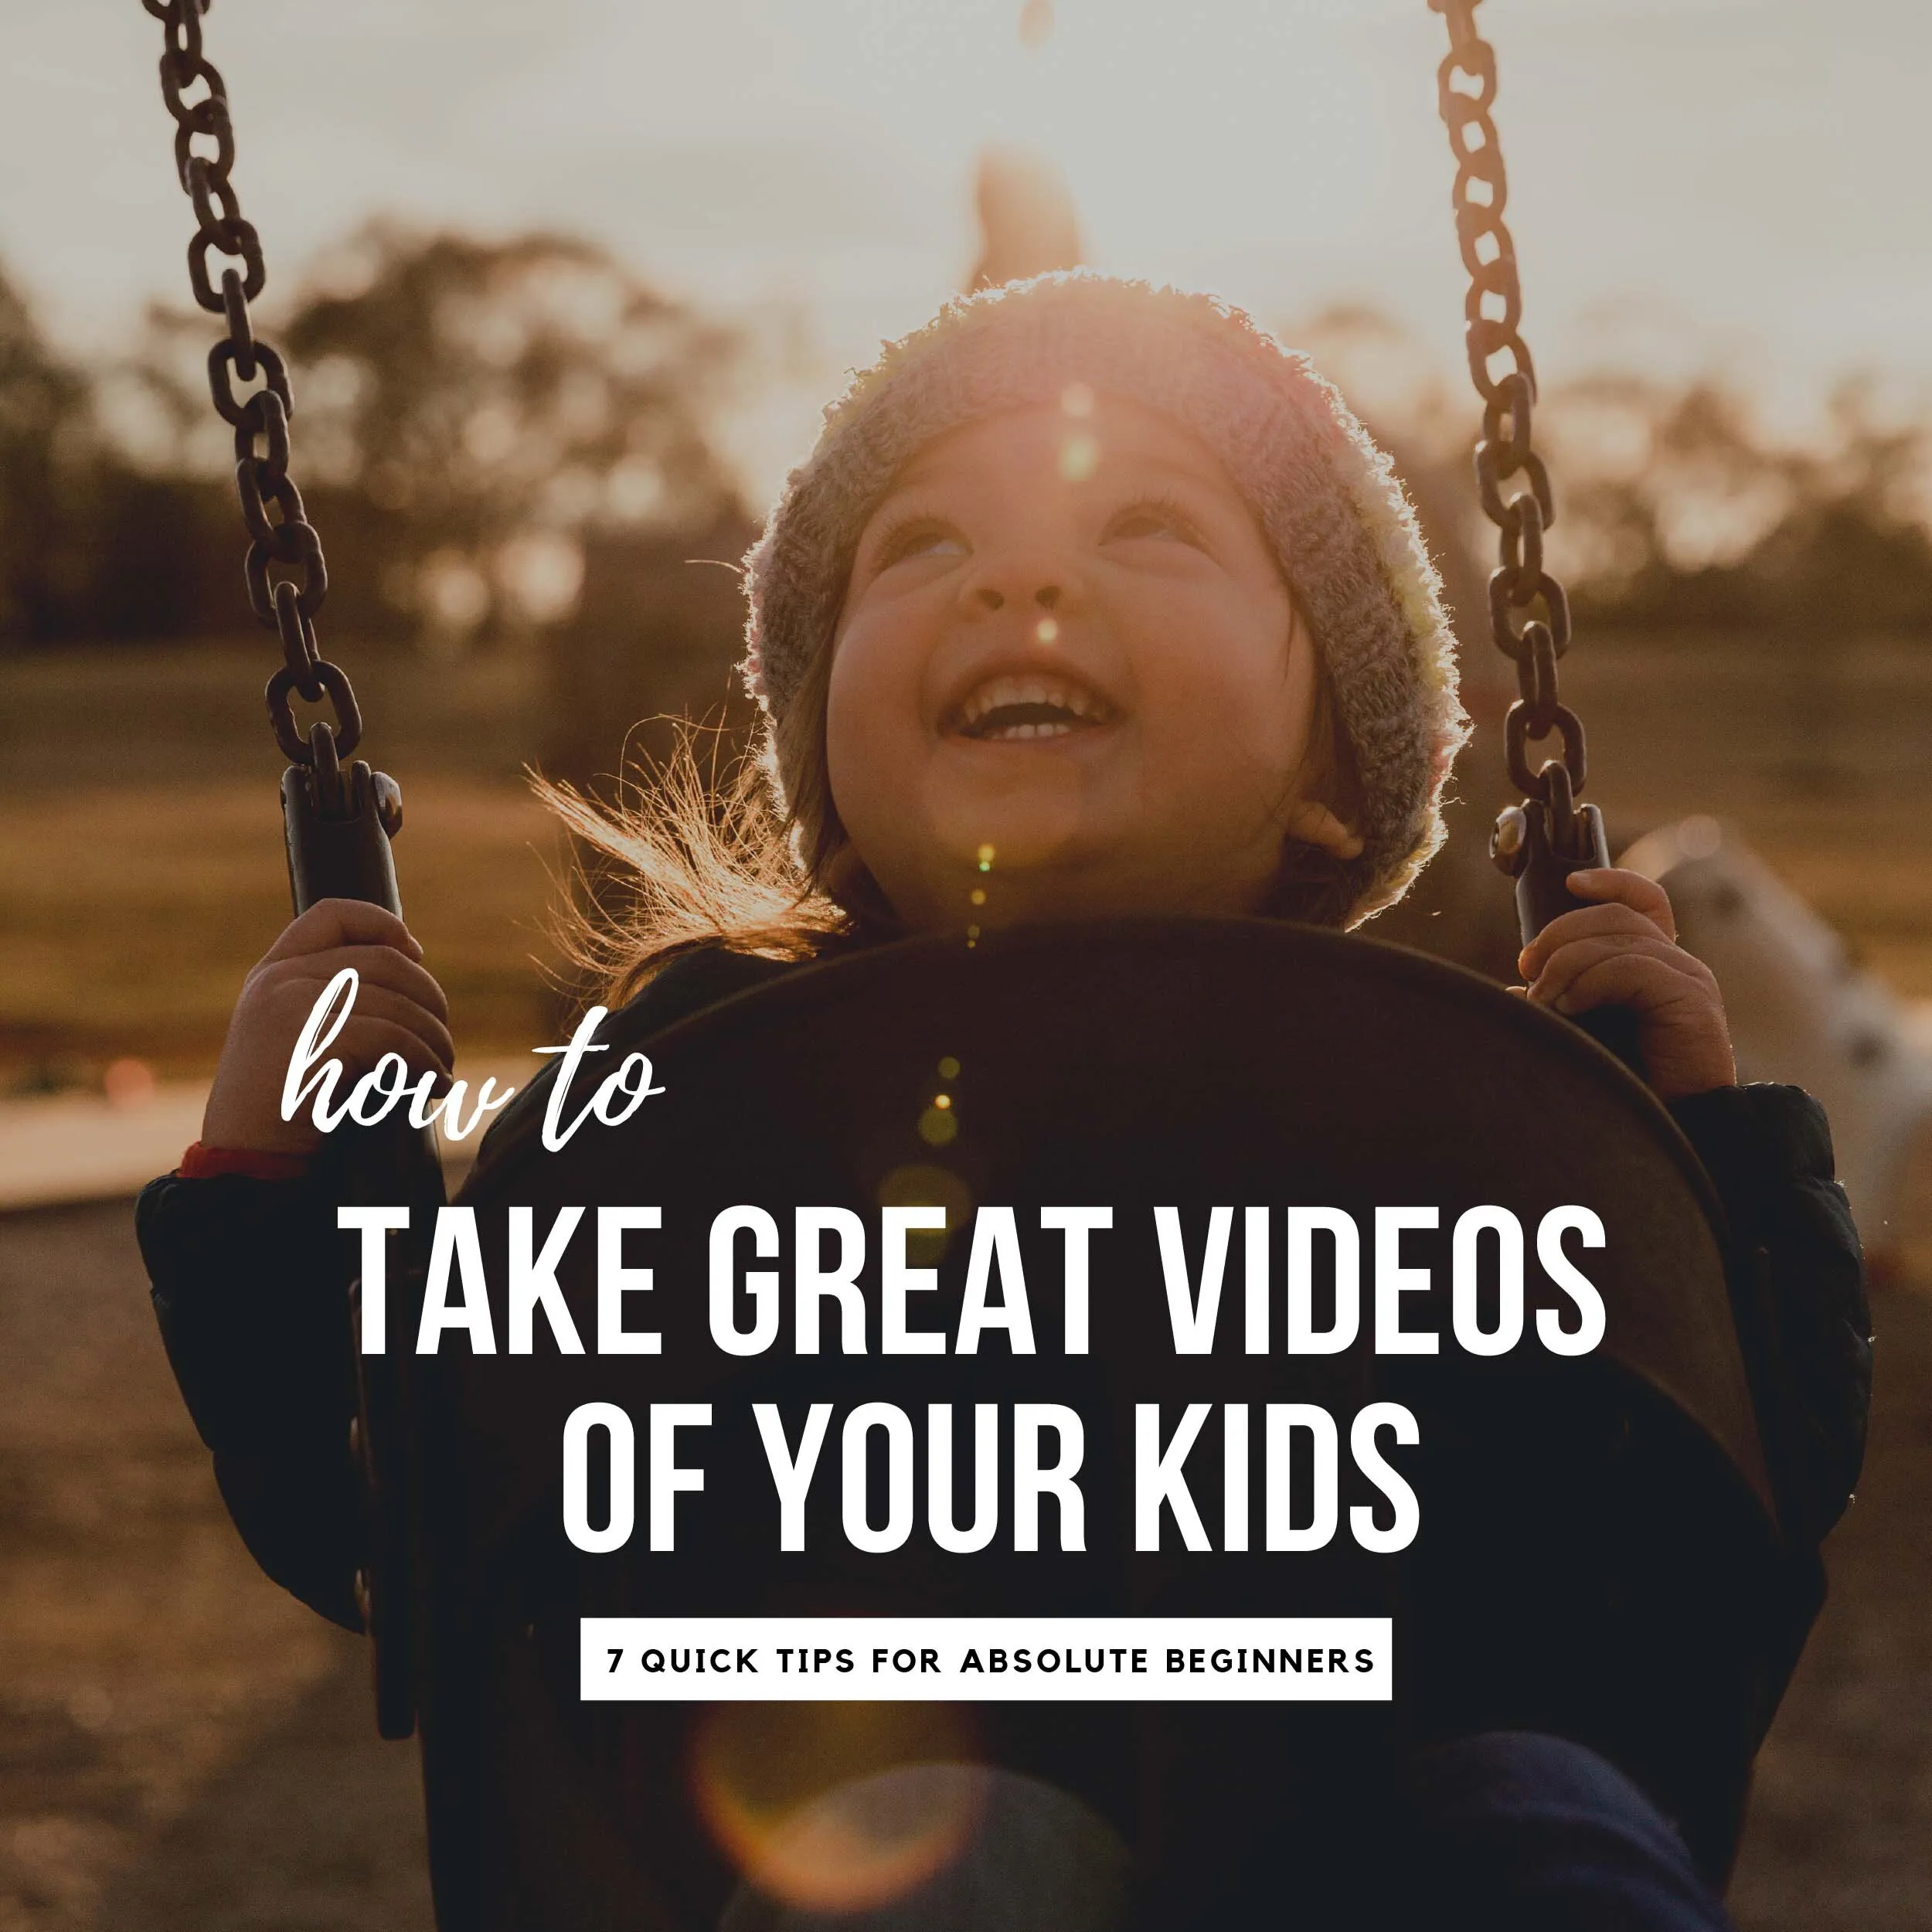 How to Take Great Videos of Your Kids